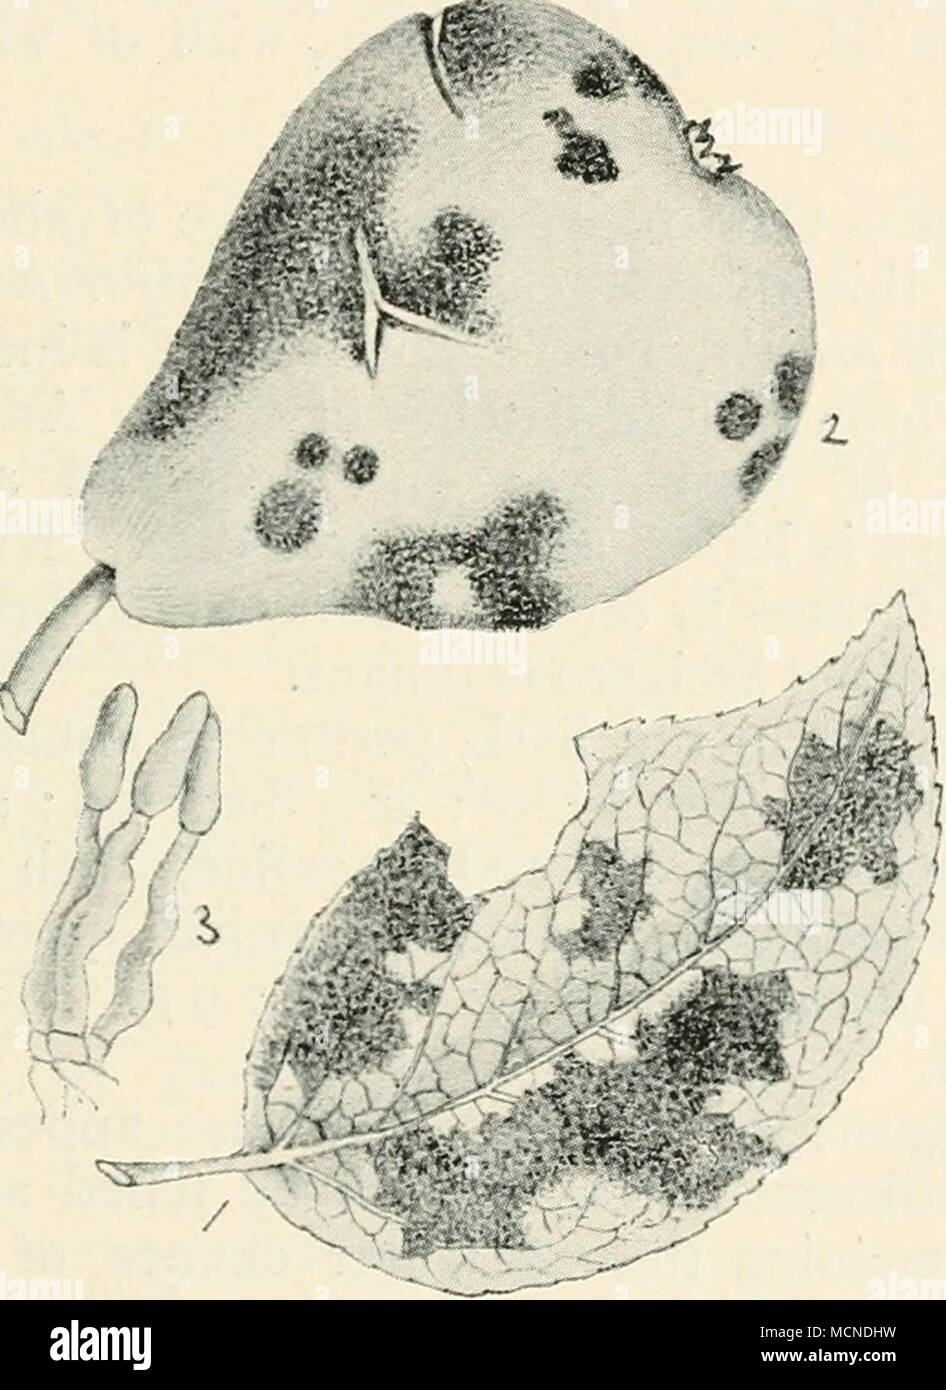 . Fig. 59.— VenturiiZ pirina. i, conidial form of fungus on pear leaf; 2, conidial form of fungus on pear, causing scab ; 3, fruit of conidial stage, highly mag. shrinking and depression of a patch of bark, on which longi- tudinal and transverse cracks appear. When the wound becomes open, black pycnidia appear, followed by the asci- gerous form of fruit. Pyenidia very minute, o-2-o'4 mm. diam., conidia colour- less, fusiform, 7-9x2-2-5 jx, on the tips of branched conidio- phores. Perithecia depressed globose, with a long, stout beak; O Stock Photo